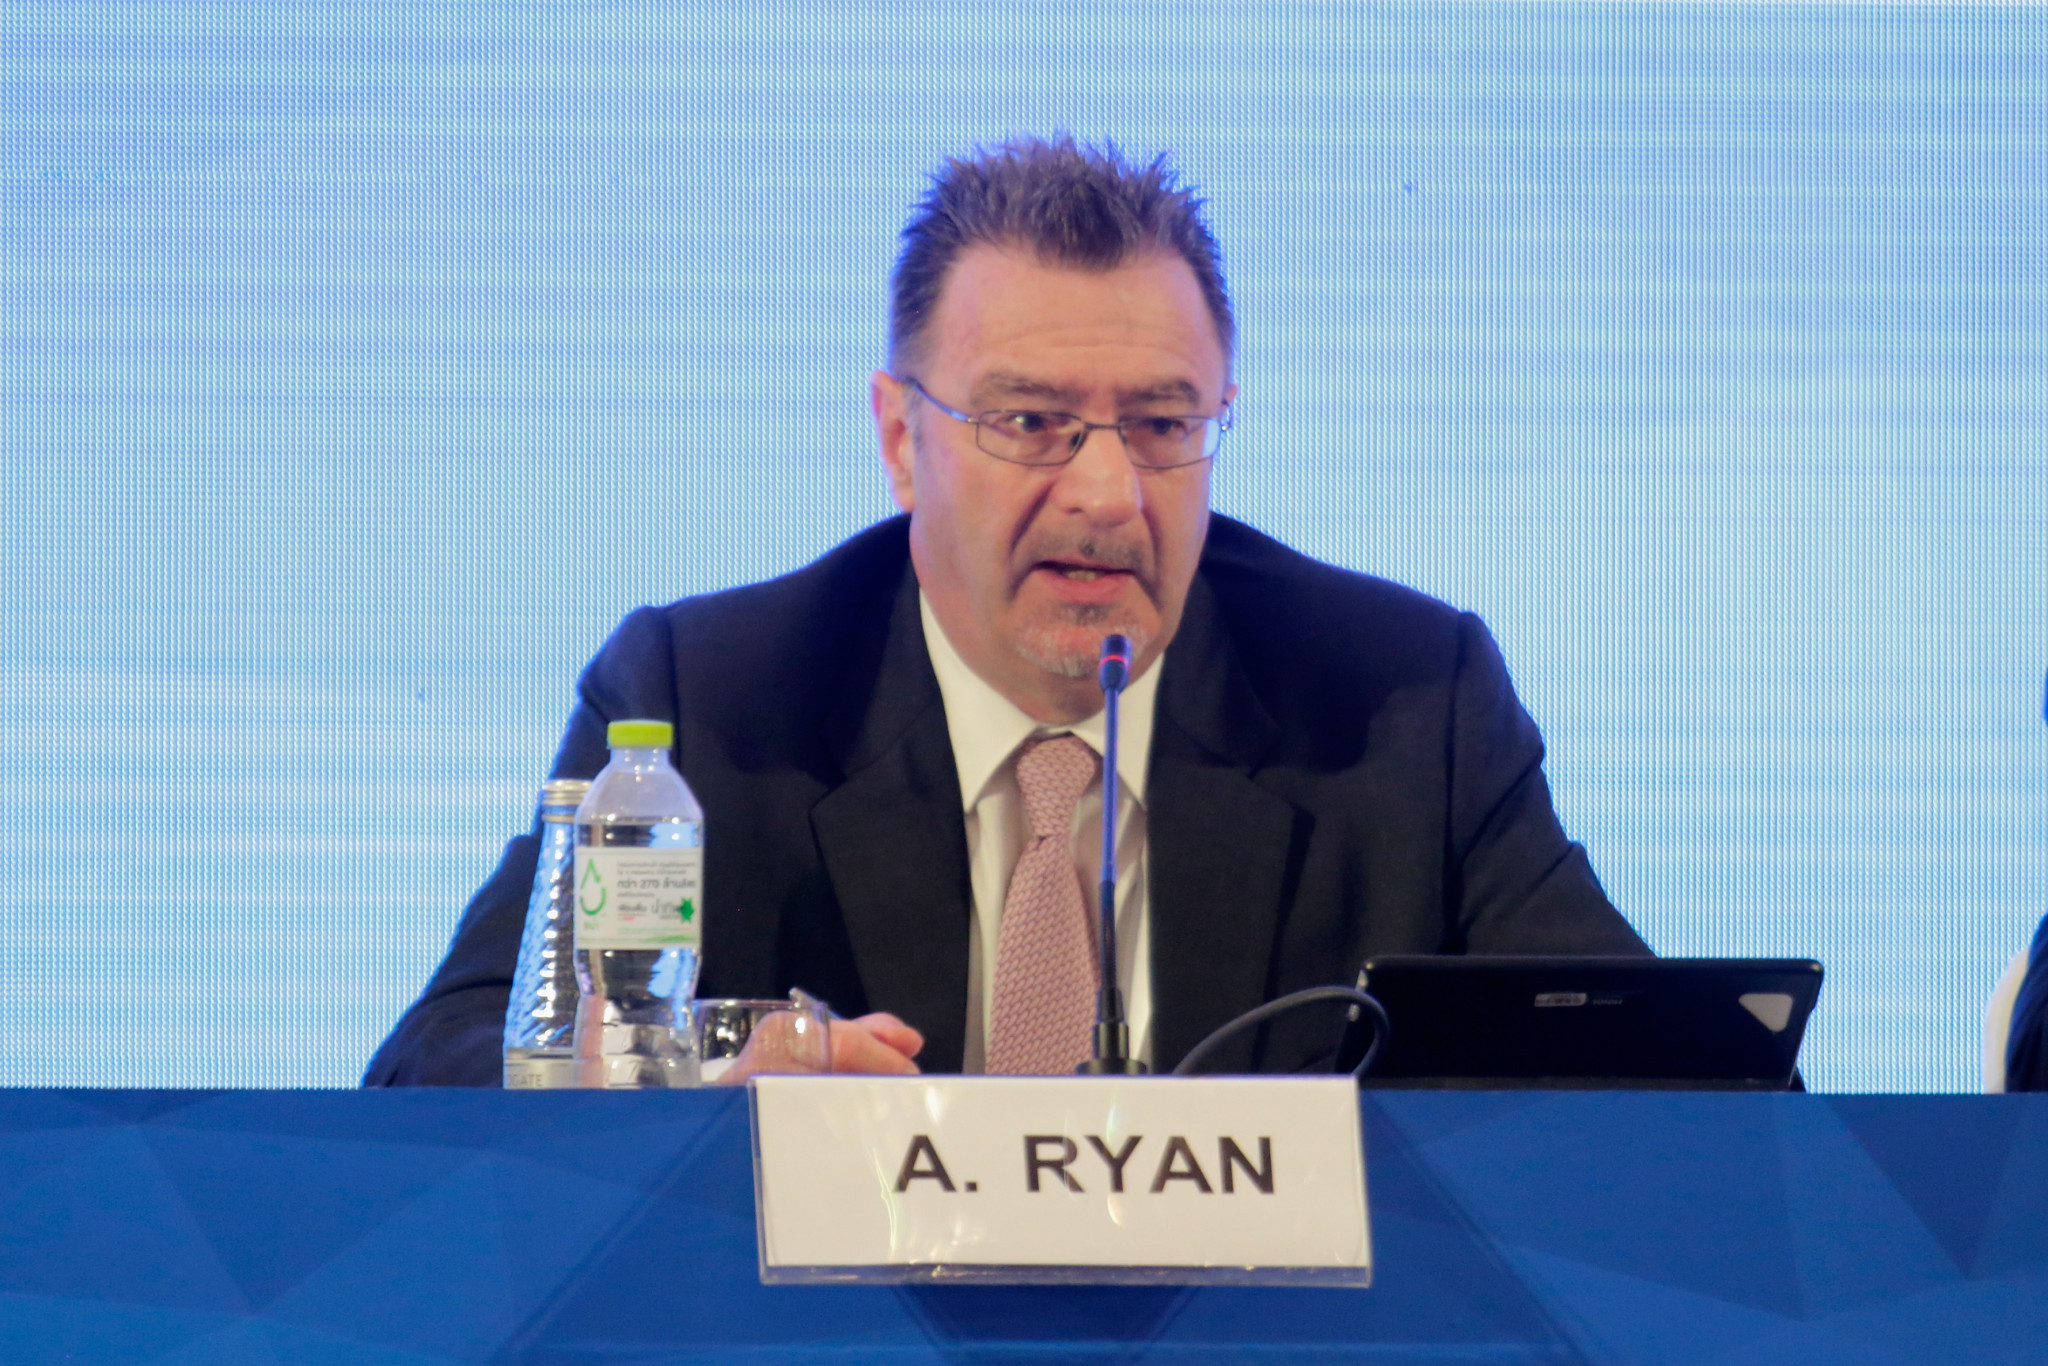 ASOIF executive director Ryan insists Paris 2024 right to build venues in "deprived" Saint-Denis